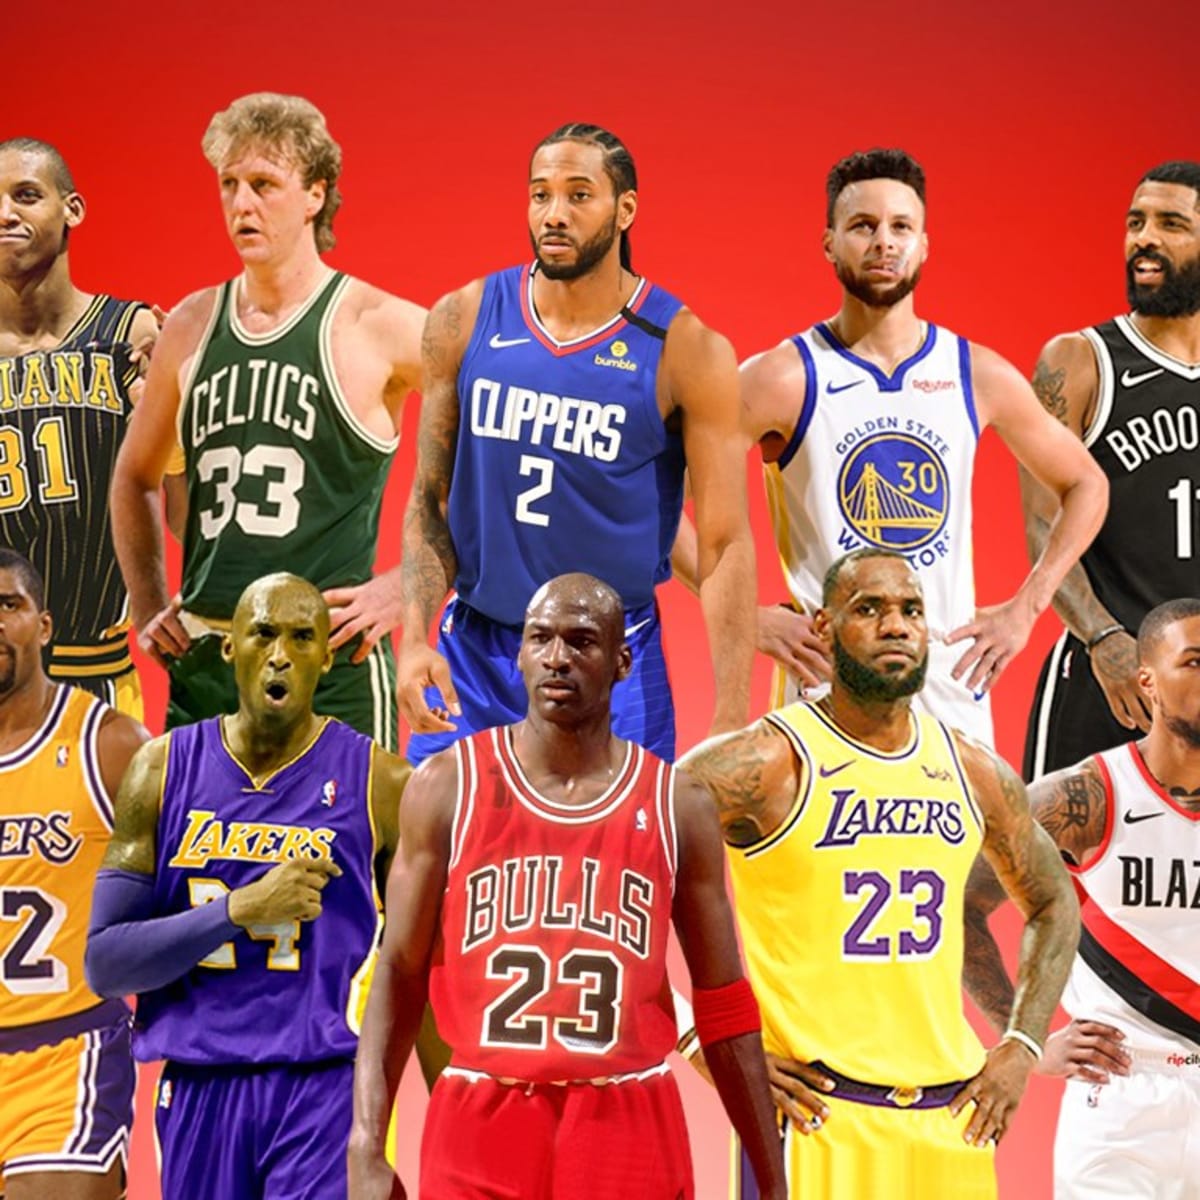 Who is the greatest clutch shooter of all time?